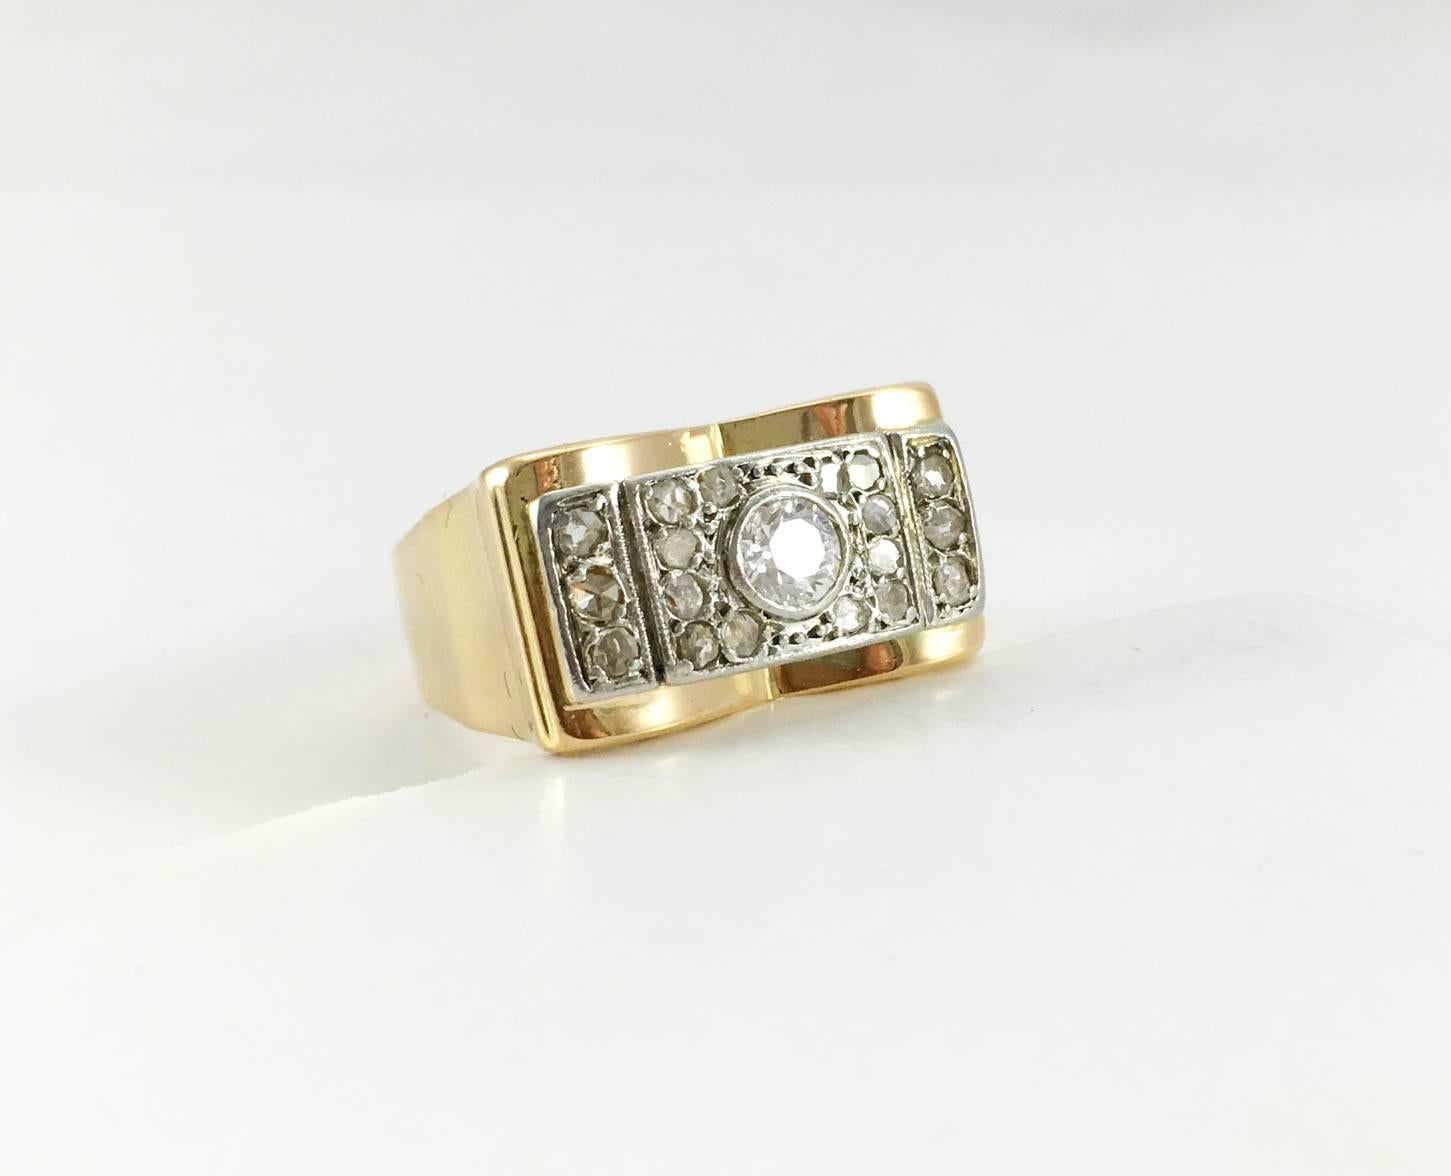 Gold and Diamond Cocktail Ring - 1940s For Sale 2